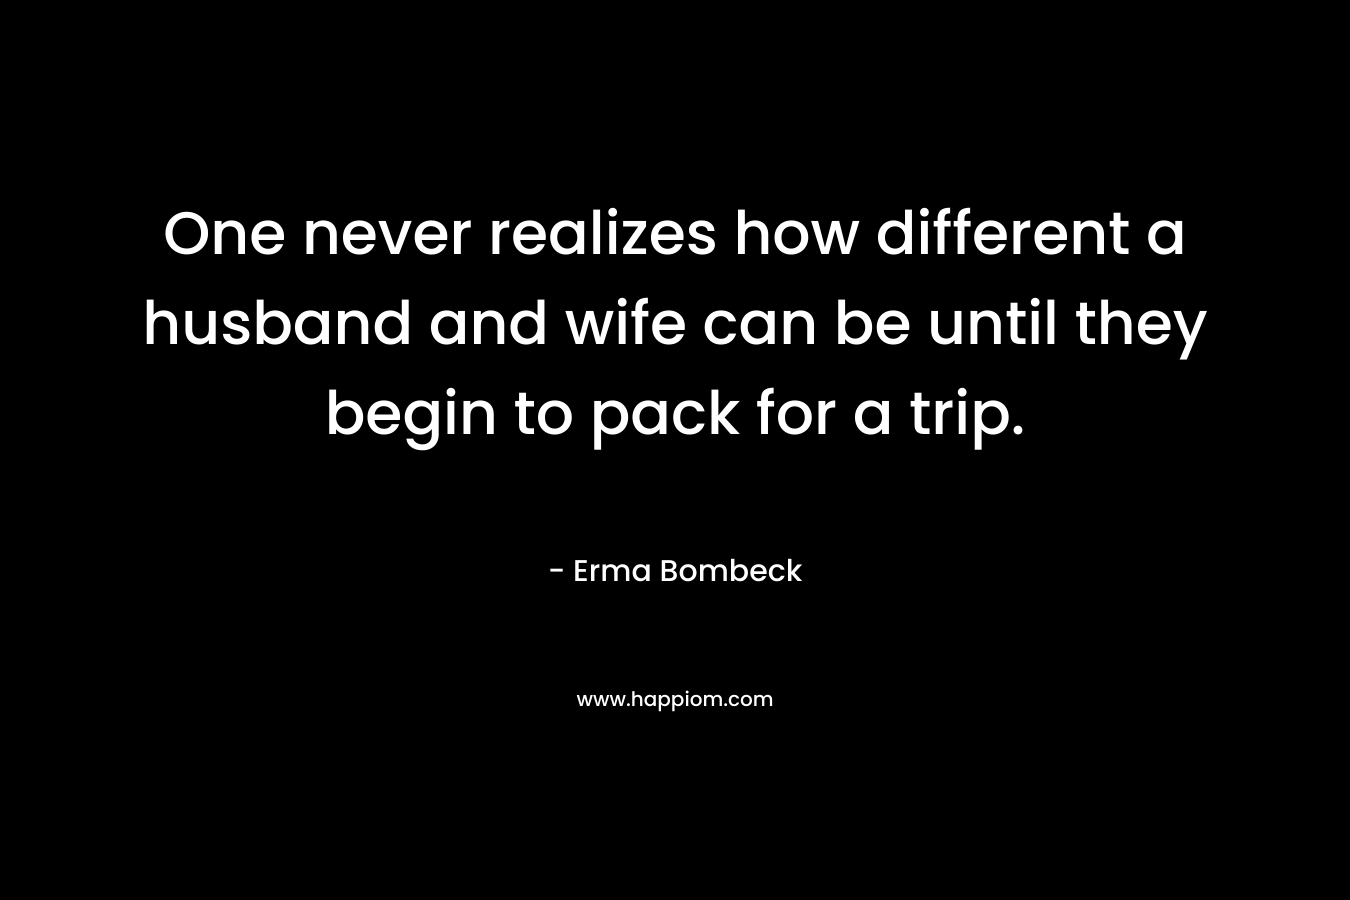 One never realizes how different a husband and wife can be until they begin to pack for a trip.